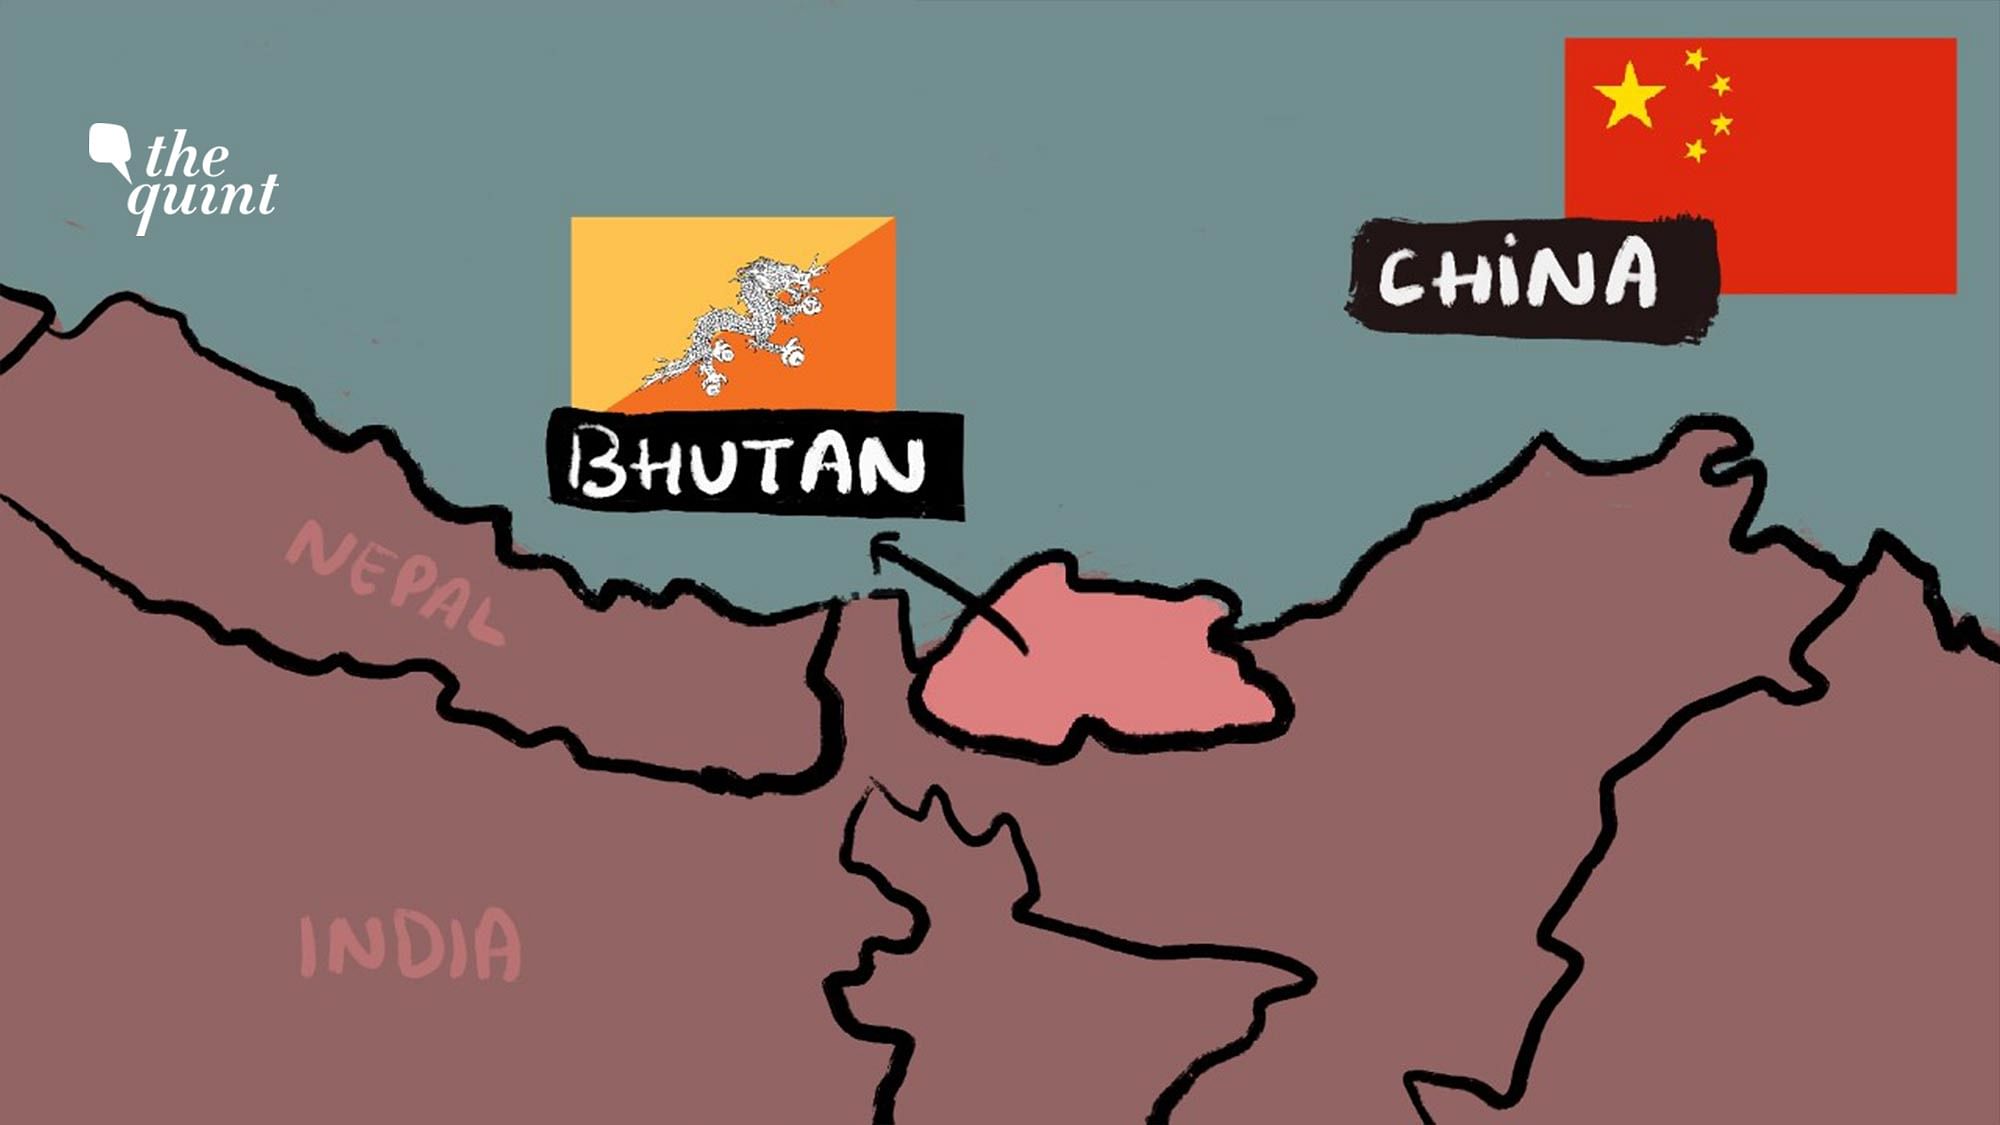 Bhutan rejected China’s claims and added that ‘Sakteng Wildlife Sanctuary is the sovereign territory of Bhutan’.